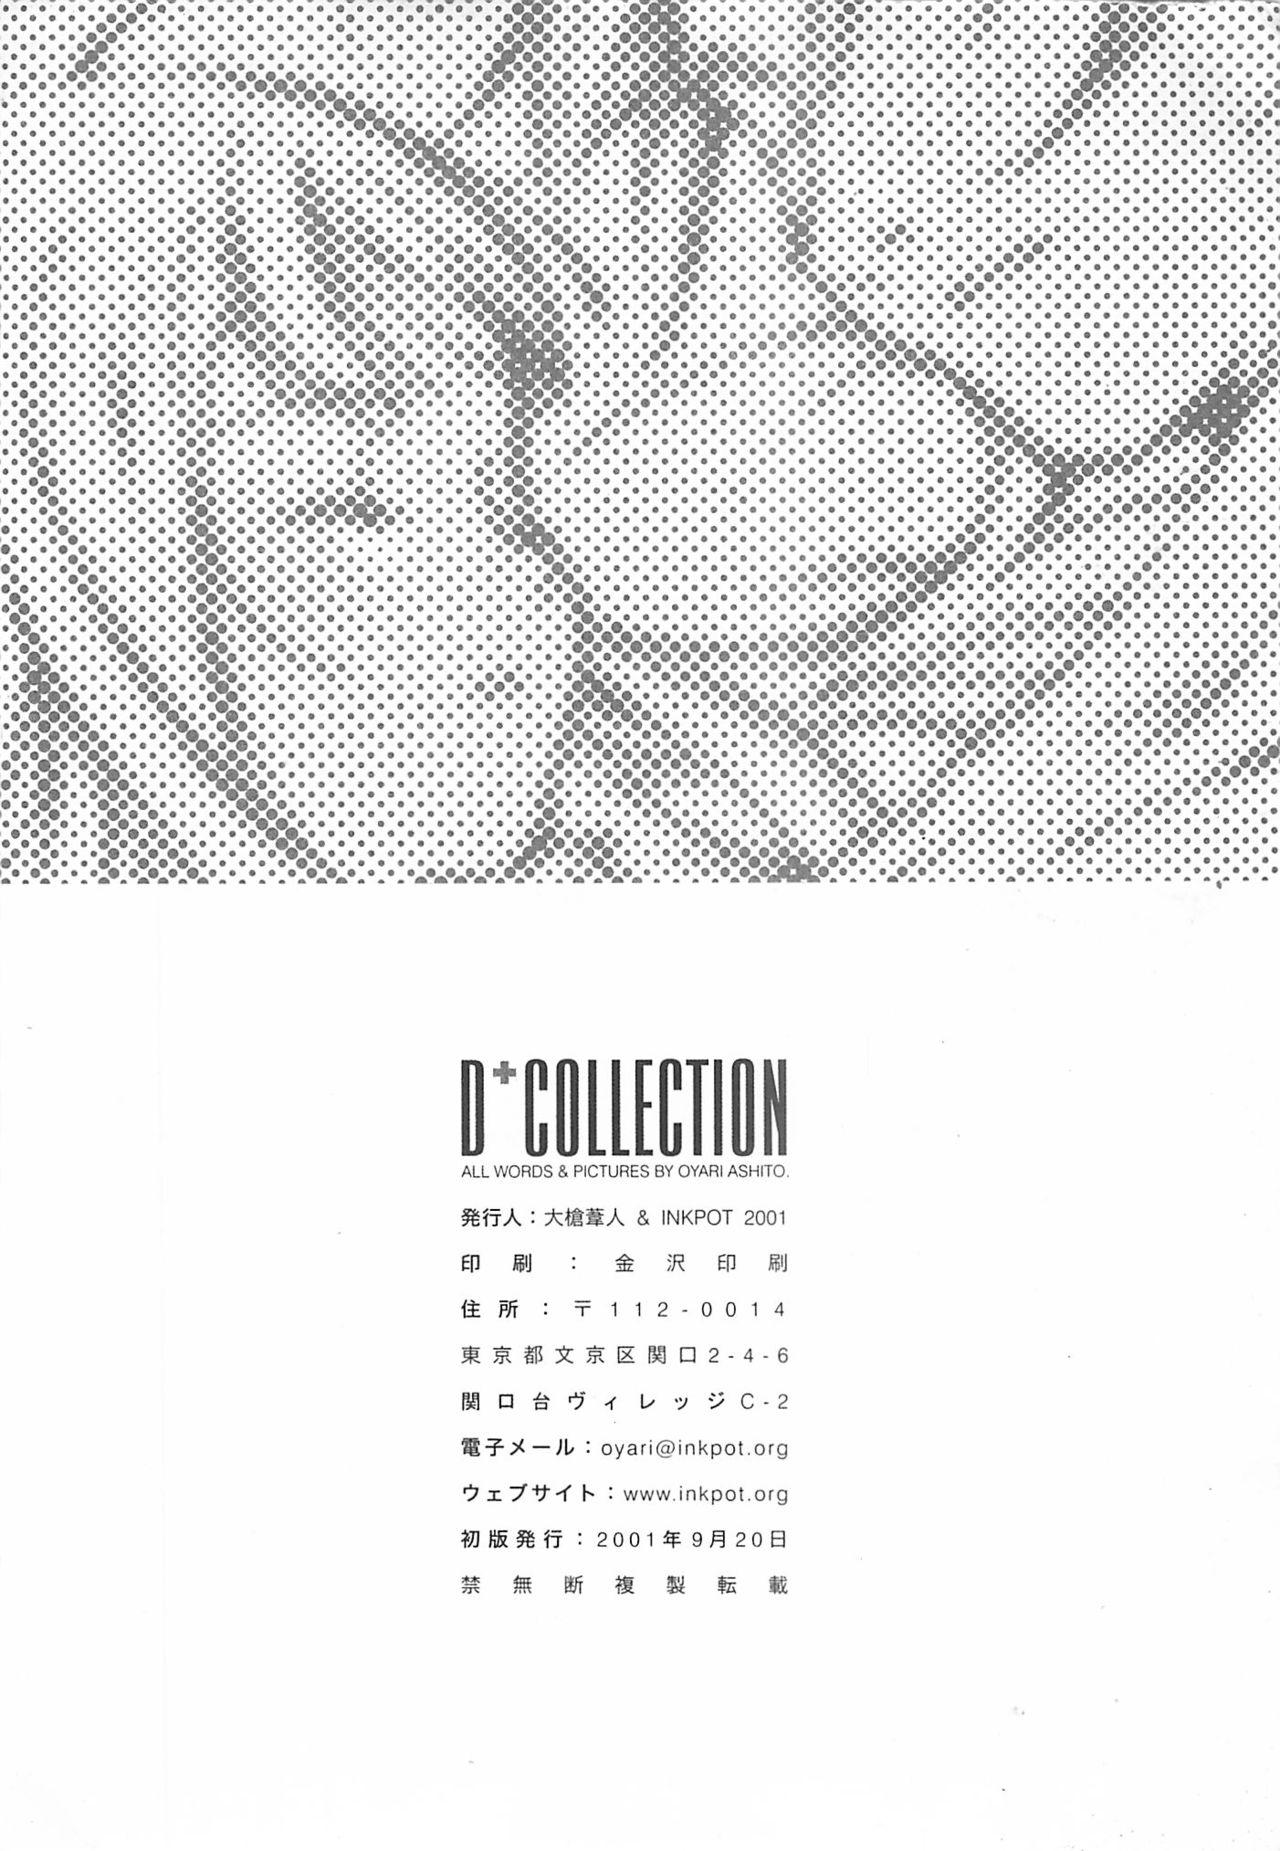 D+COLLECTION 287